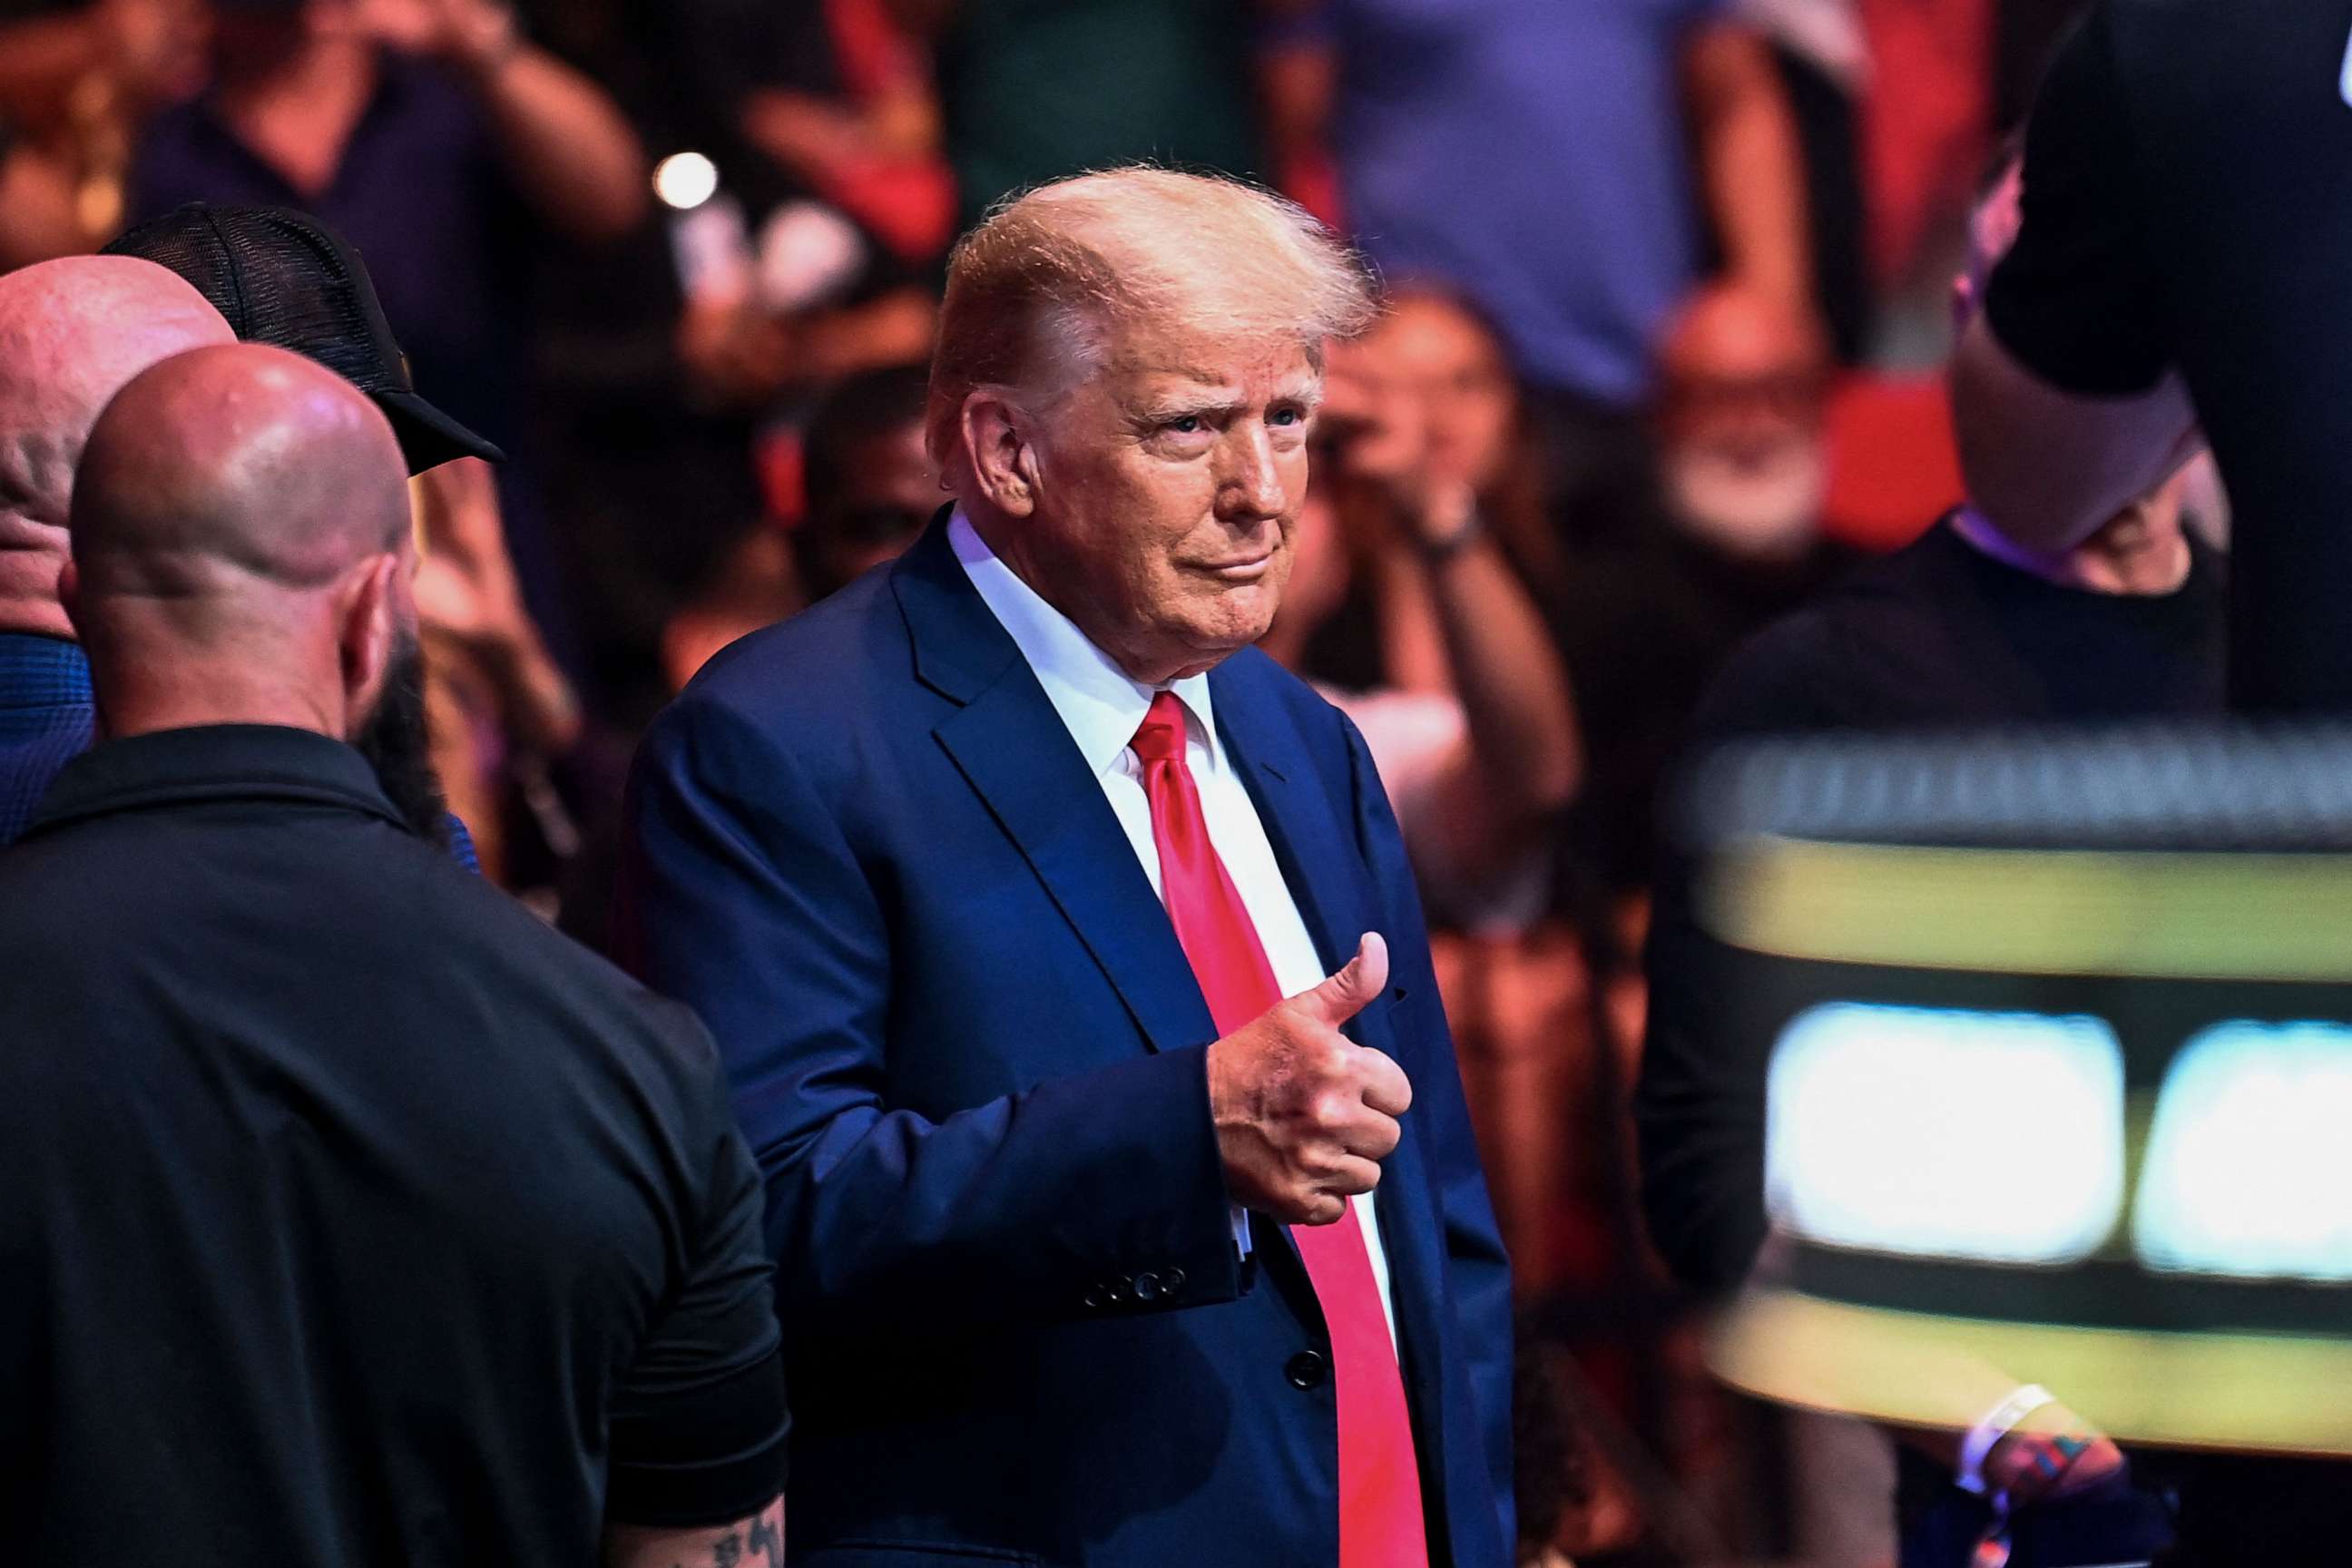 PHOTO: Former President Donald Trump attends the Ultimate Fighting Championship (UFC) 287 mixed martial arts event at the Kaseya Center in Miami, Florida, on April 8, 2023.